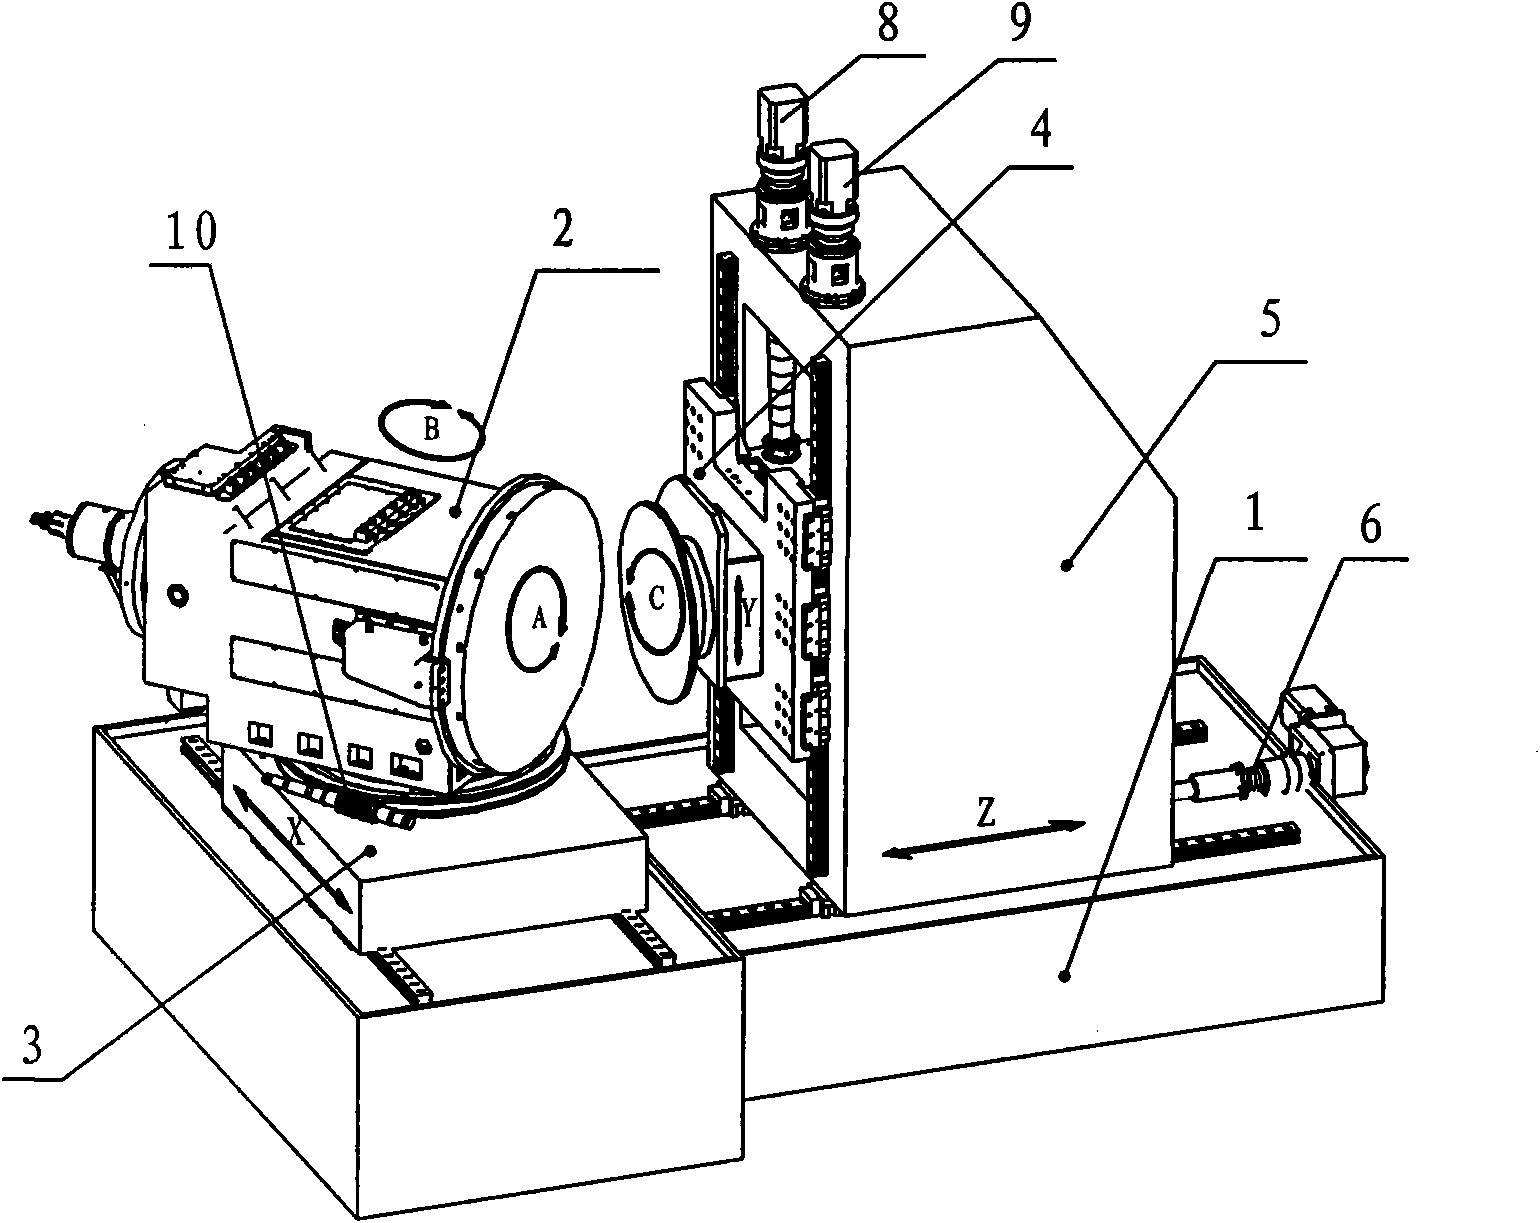 Numerical-control machine tool for processing spiral bevel gear